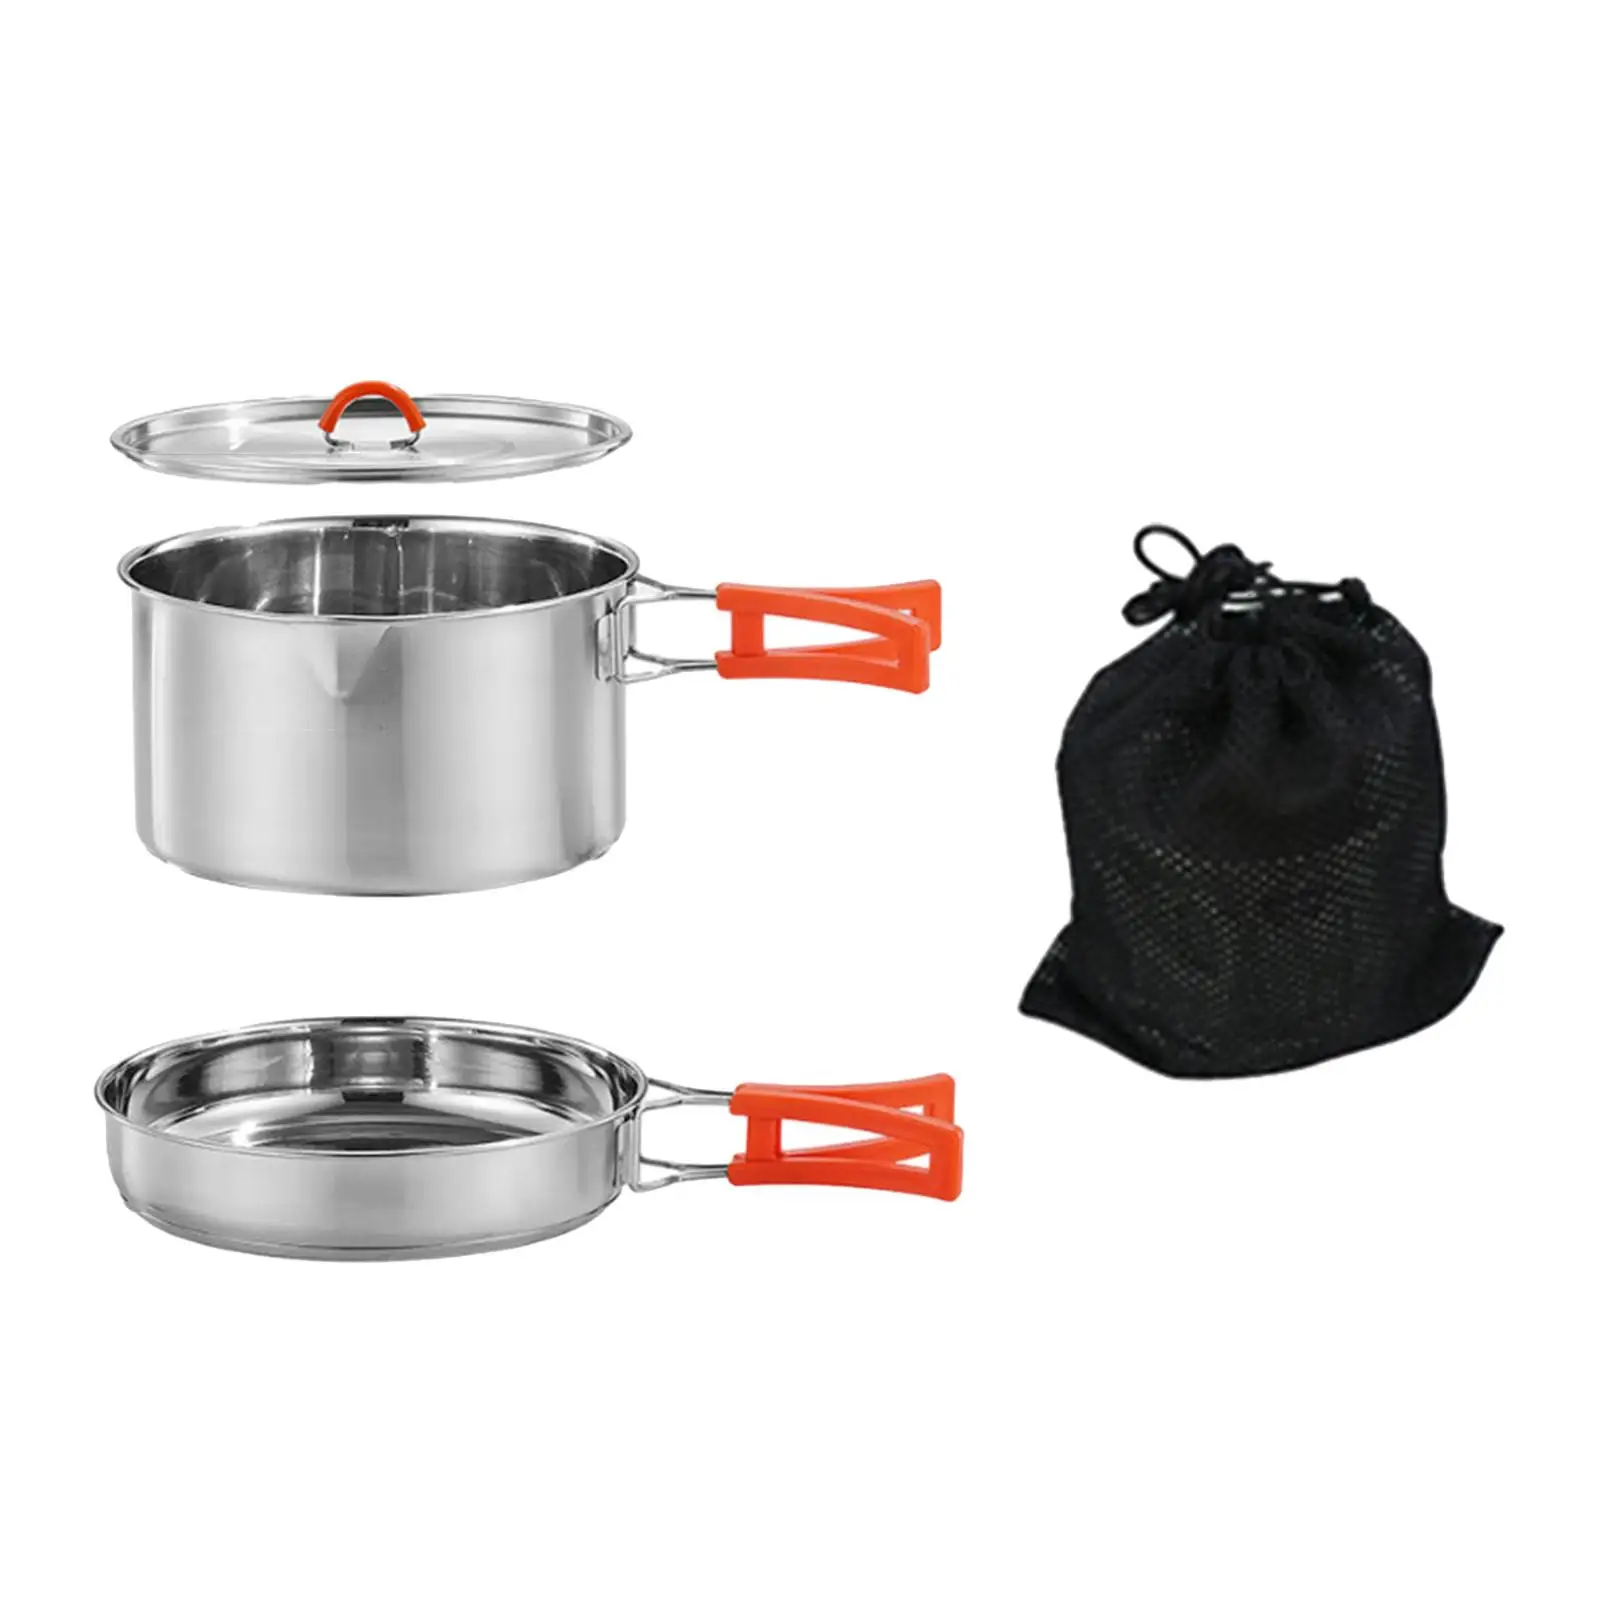 Camping Cookware Durable Portable with Folding Handles Camping Pot and Pan Set for Picnic Outdoor Backpacking Accessories Gear